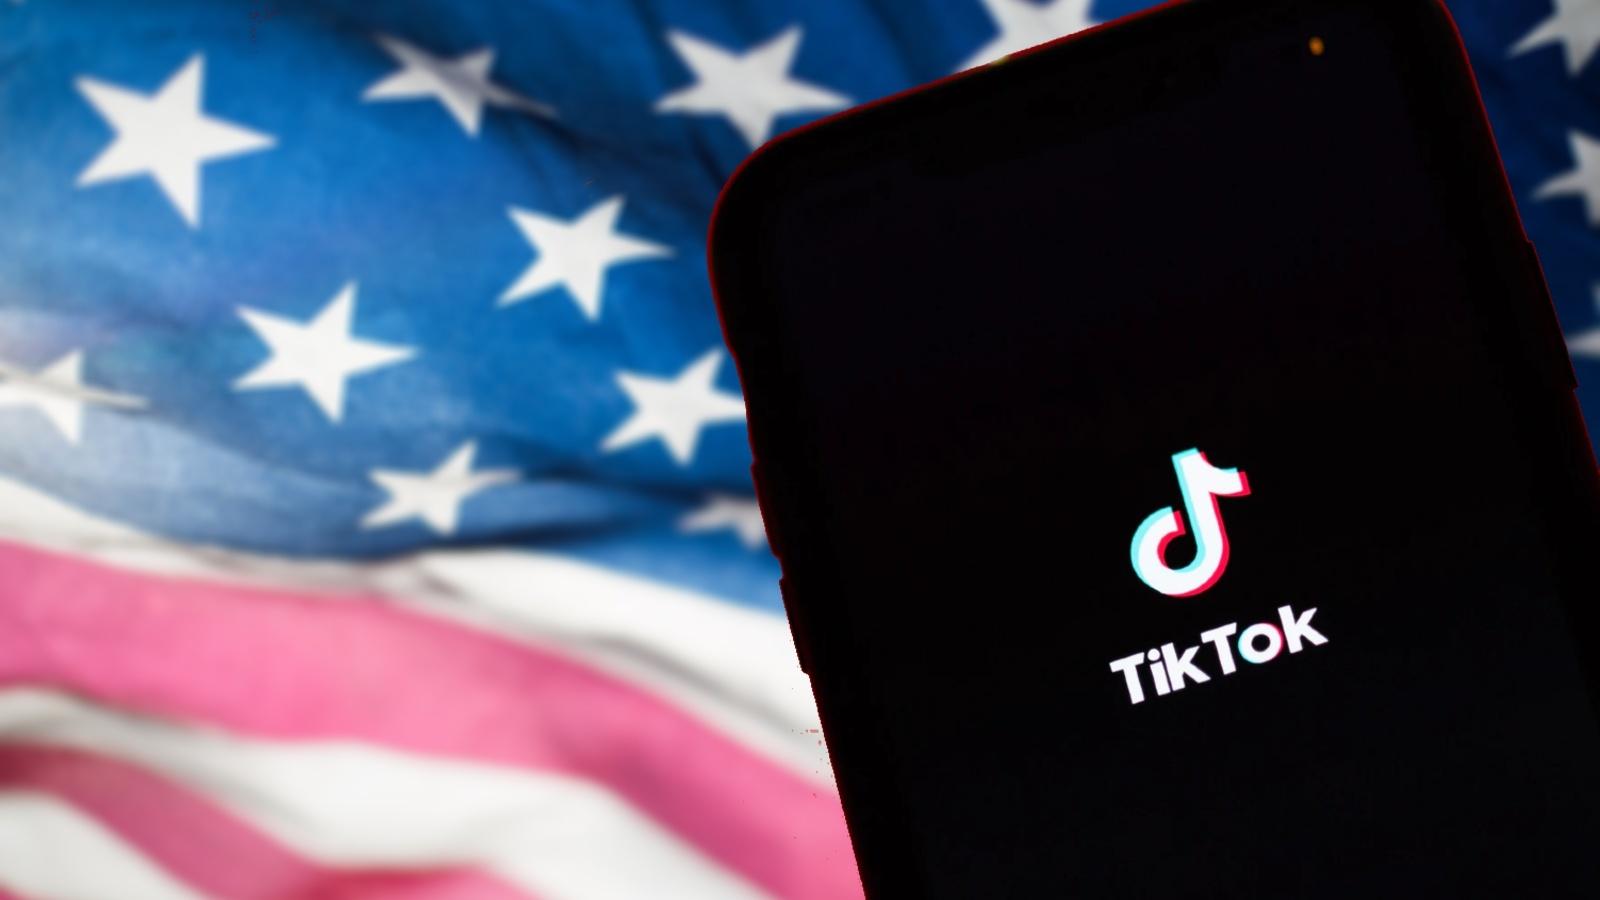 TikTok on a phone in front of US flag